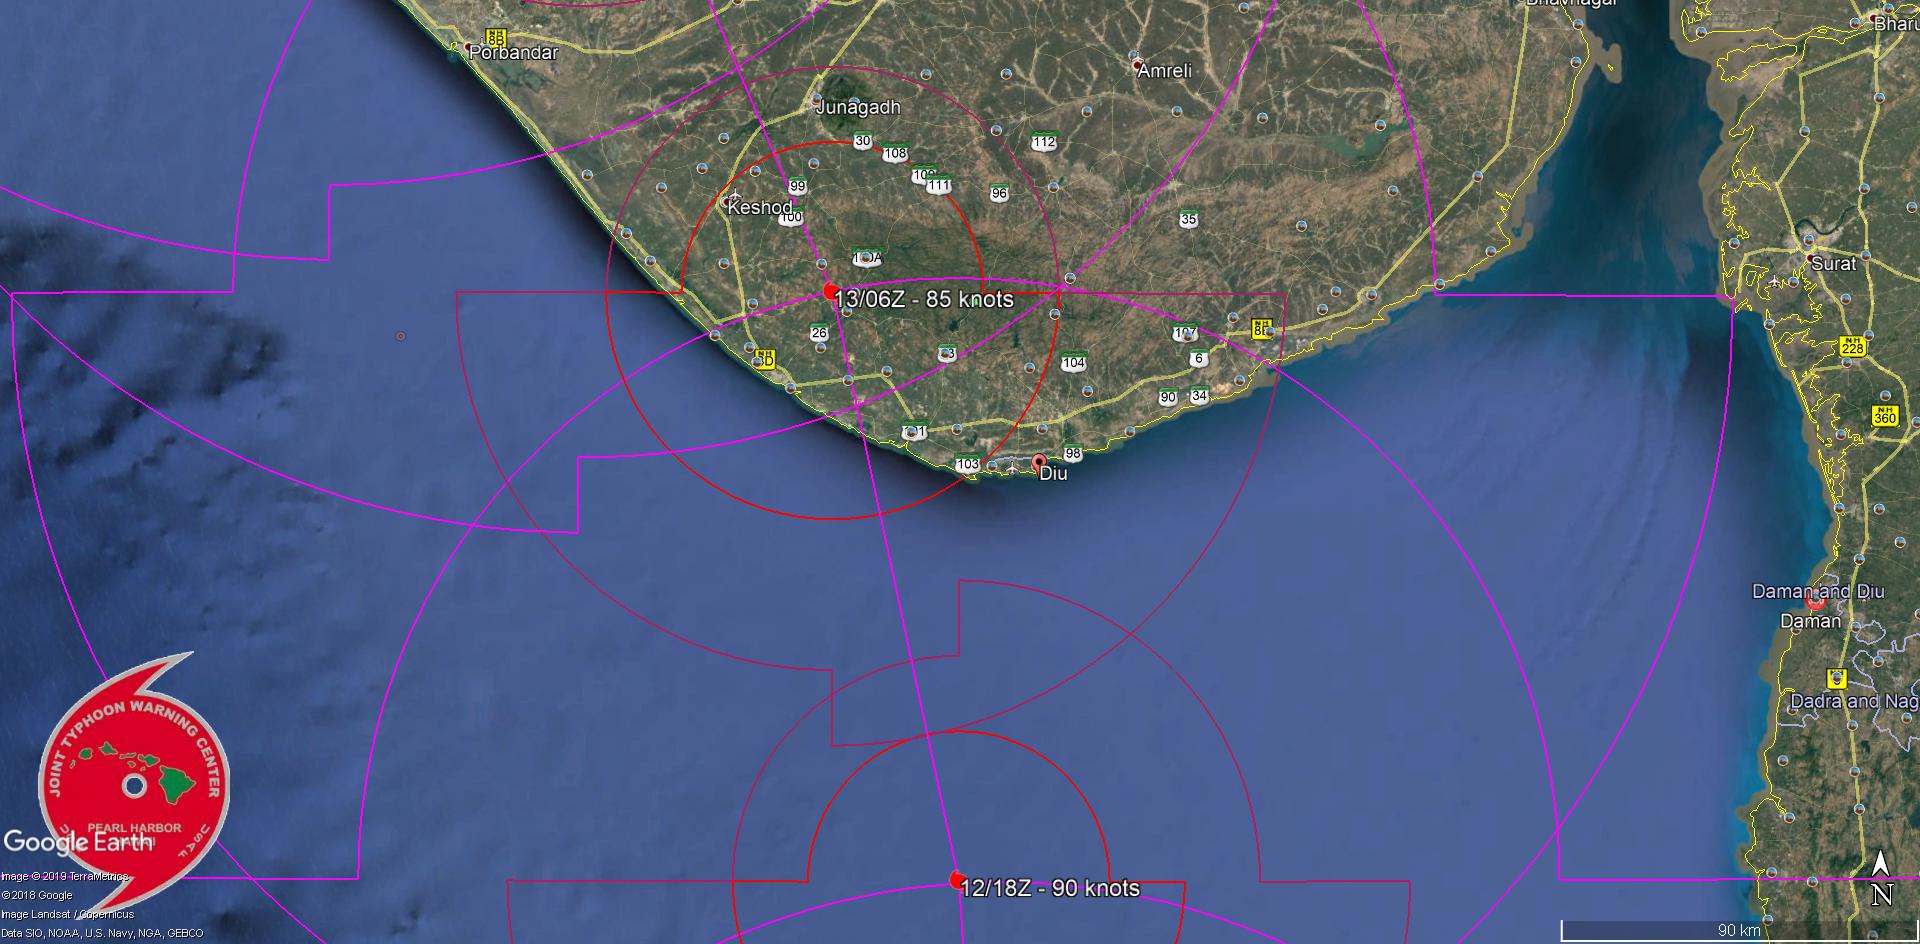 FORECAST LANDFALL AREA BETWEEN DIU AND PORBANDAR SHORTLY BEFORE 48HOURS AS A CATEGORY 2 US